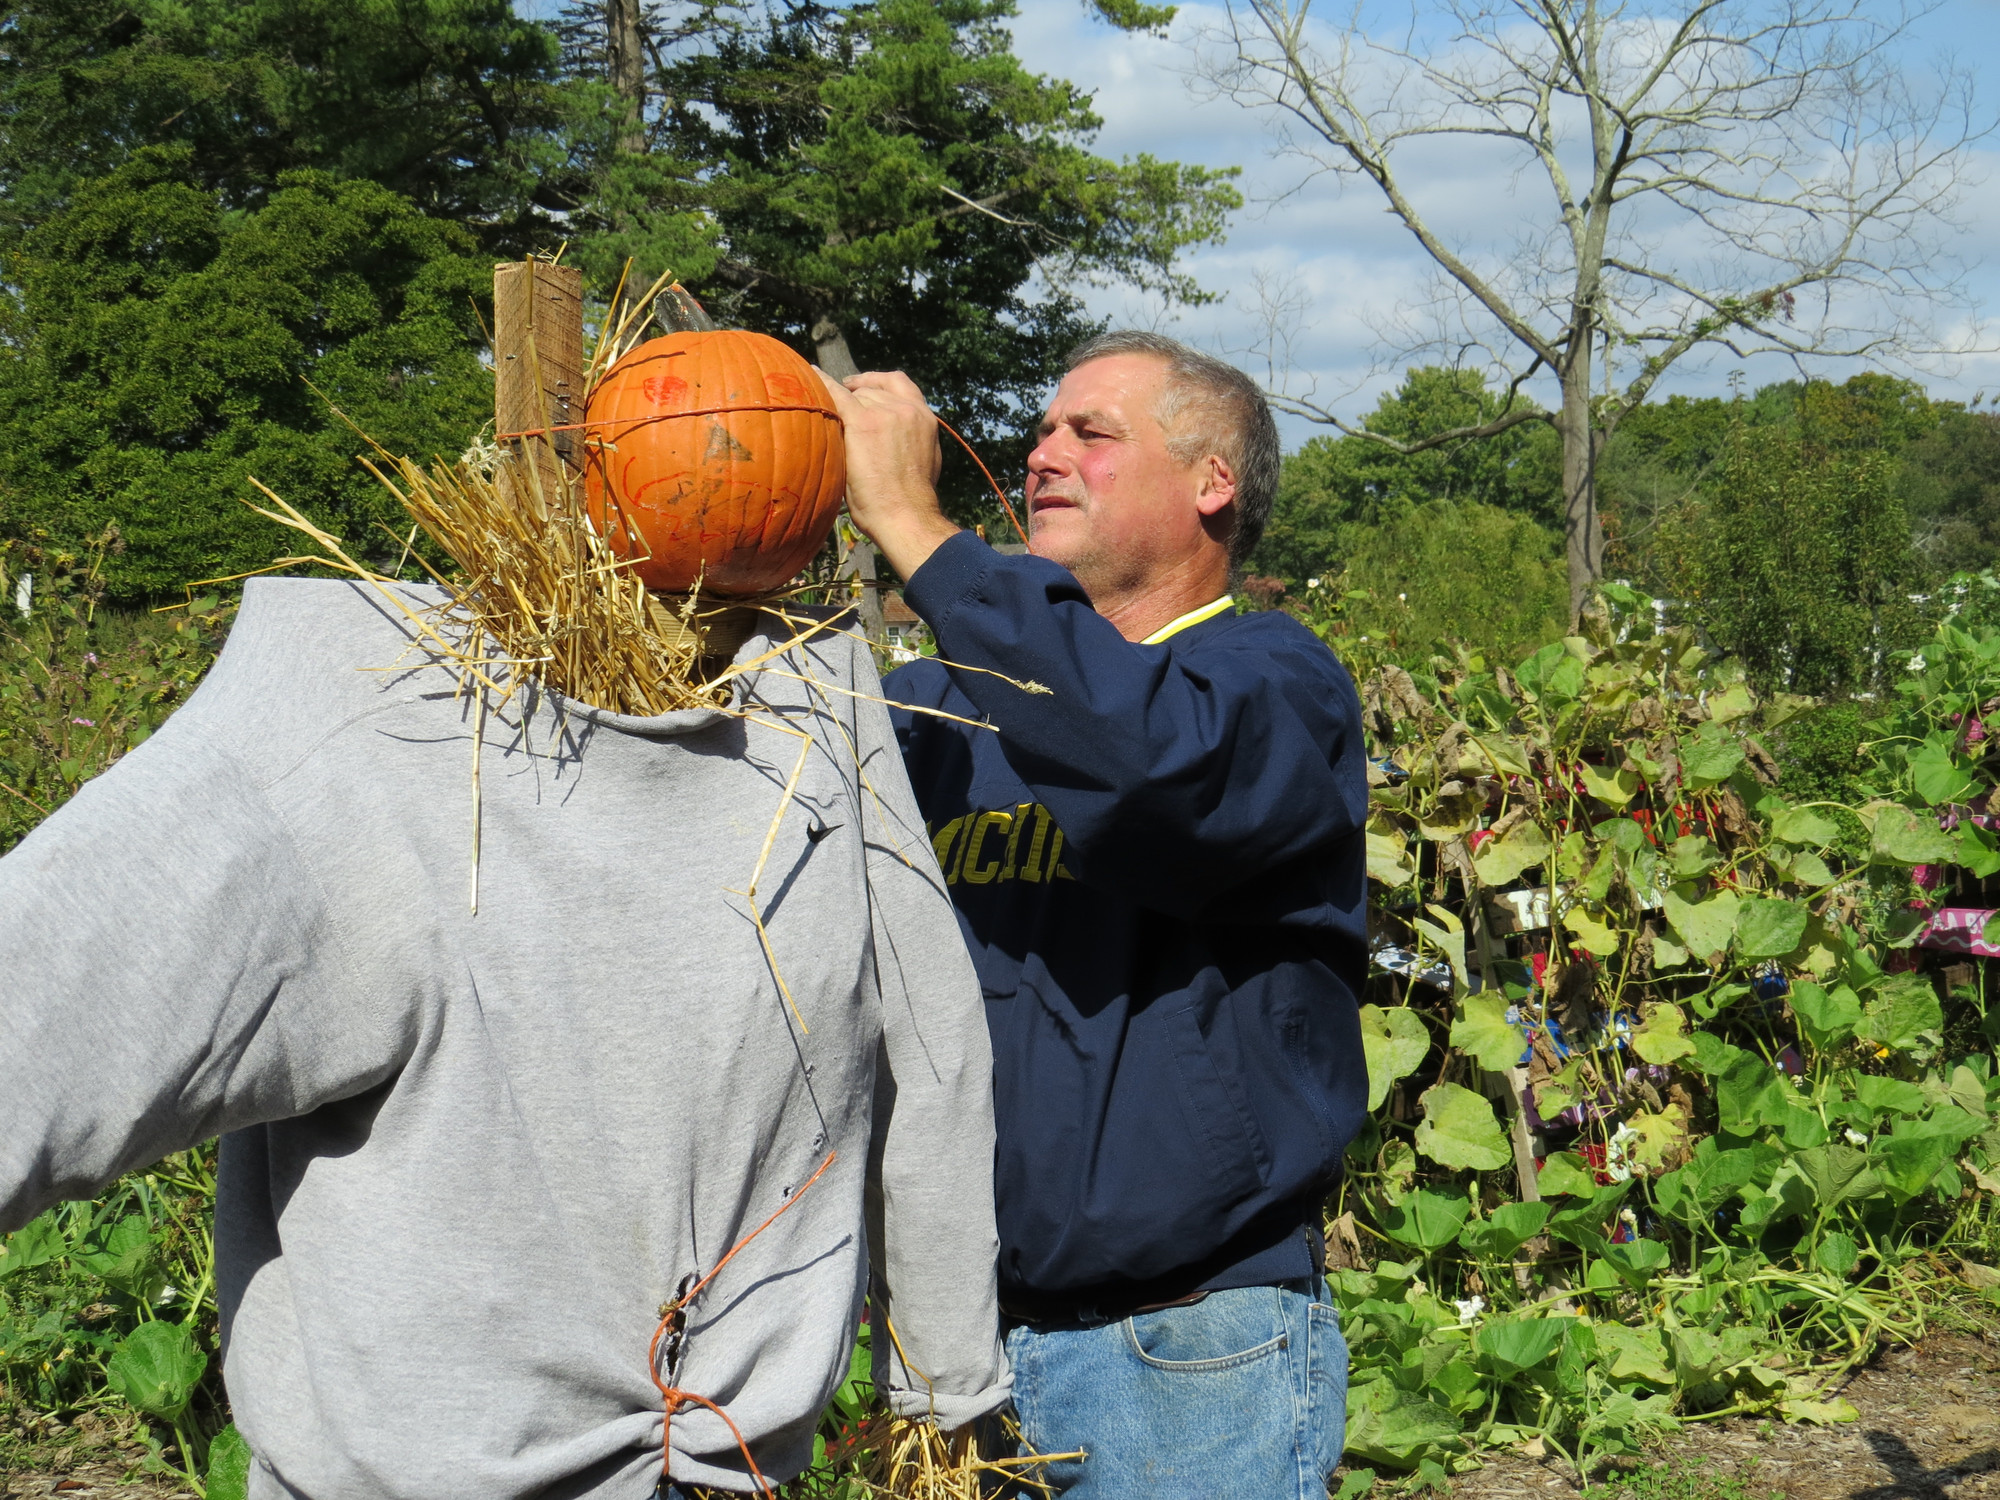 Chris Roberts, Caretaker at The Farm in Oyster Bay, secured a pumpkin headed scarecrow on Girl Scouts Fall project day.